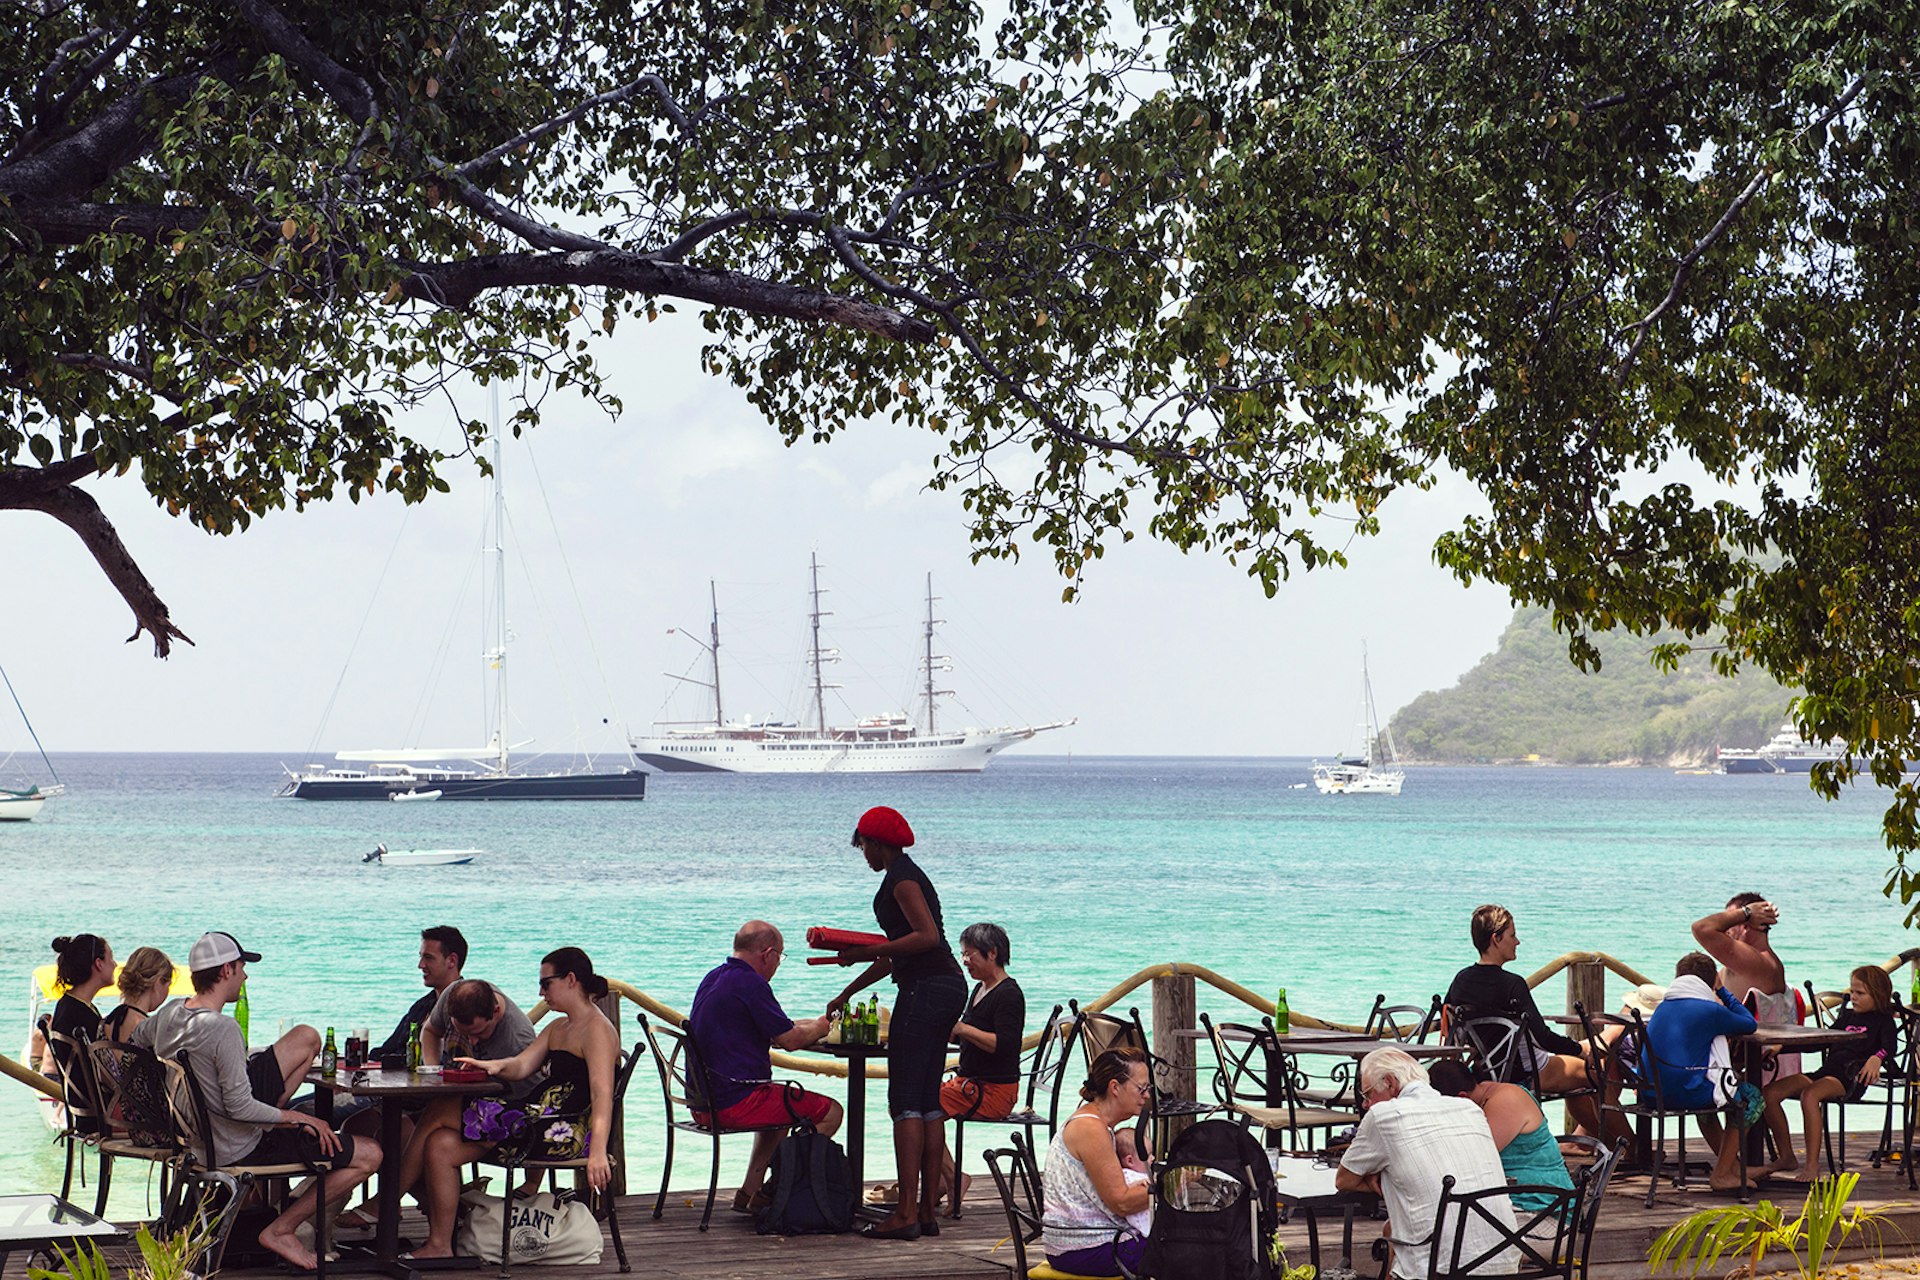 Patrons dine at a beach-side cafe near Lower Bay © Walter Bibikow / Getty Images